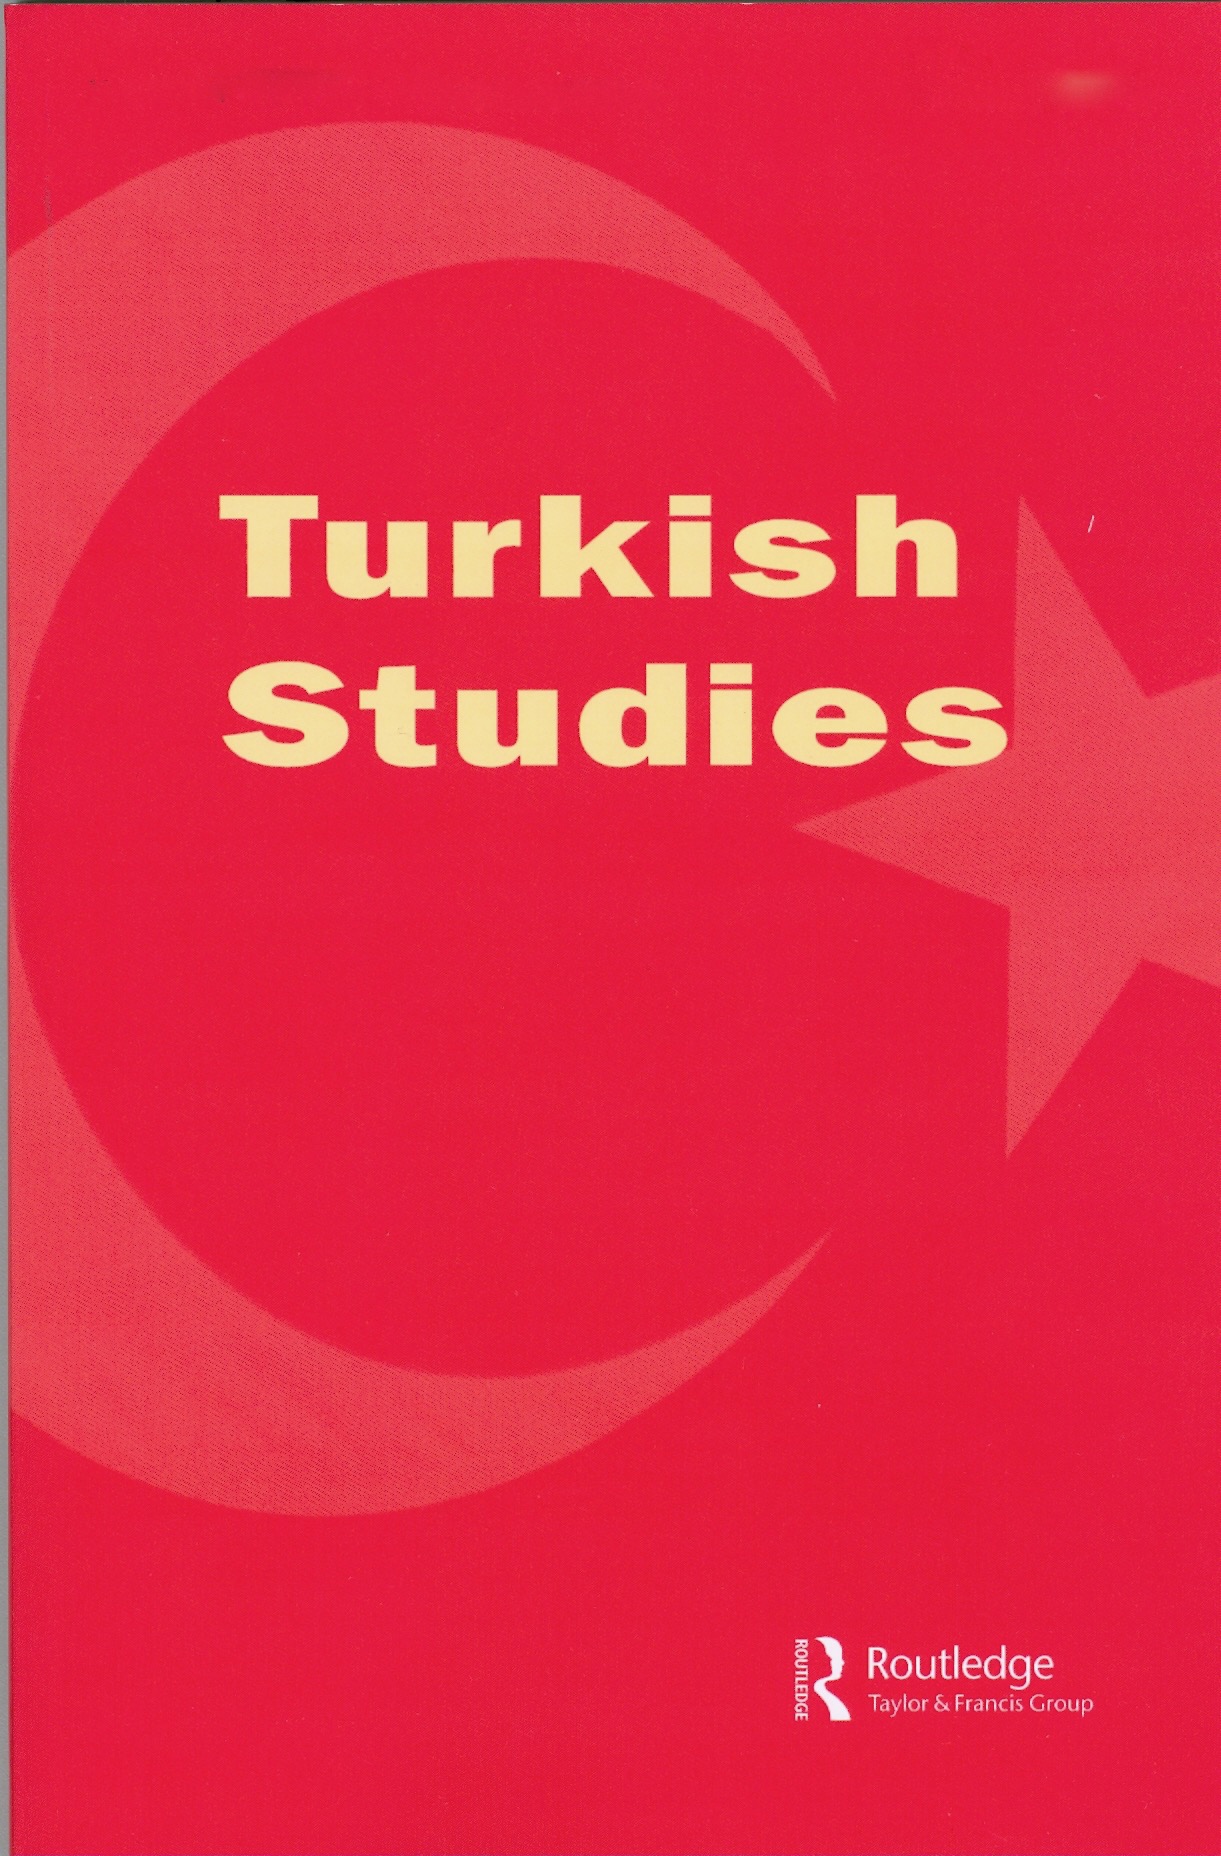 Umut Uzer, “An Intellectual History of Turkish Nationalism: Between Turkish Ethnicity and Islamic Identity,” 